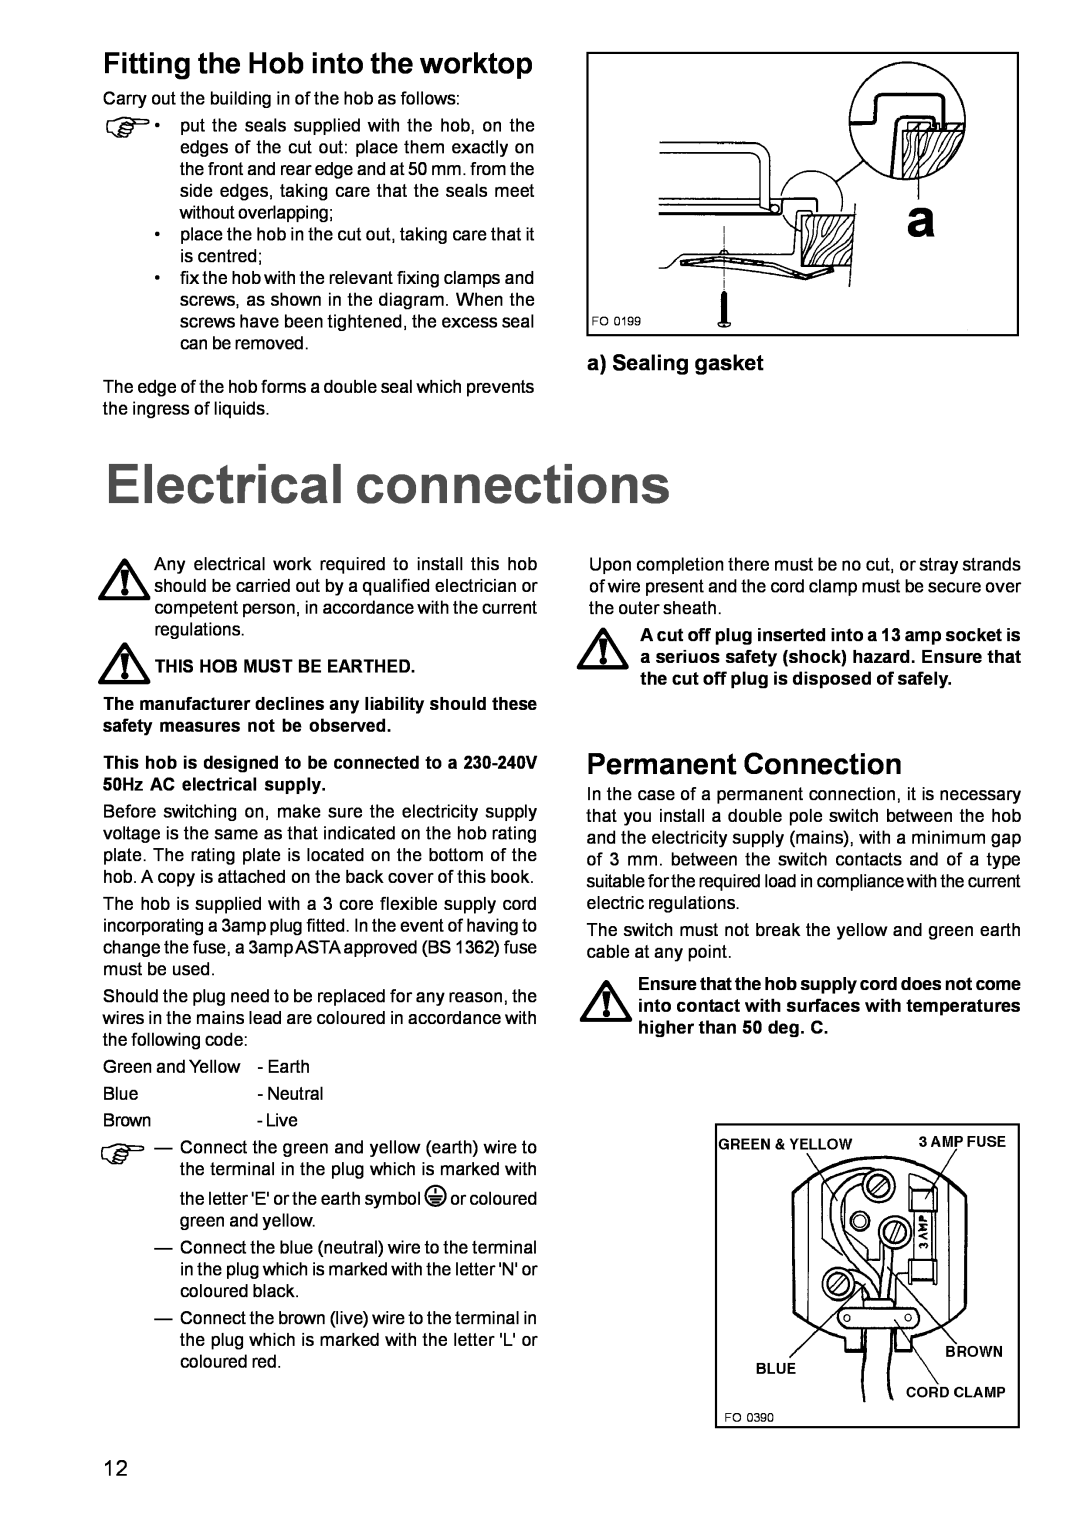 Zanussi ZGL 62 manual Electrical connections, Fitting the Hob into the worktop, Permanent Connection, a Sealing gasket 